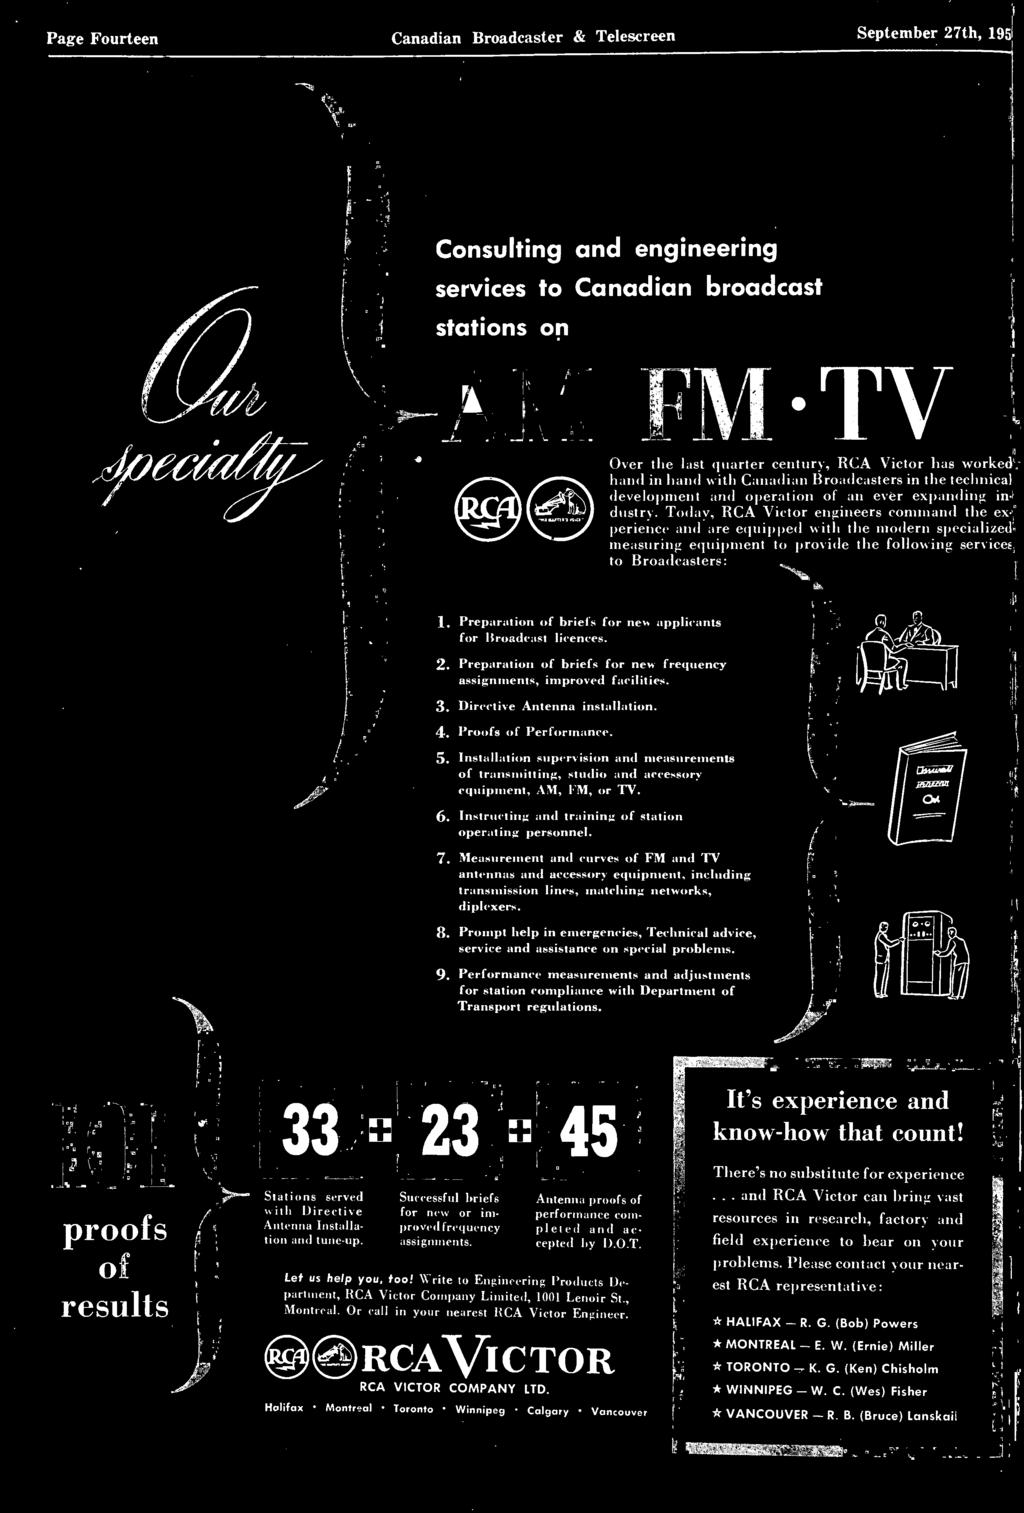 Instlltion supervision nd mesurements of trnsmitting, studio nd ccessory equipment, AM, FM, or TV. 6. Instructing nd trining of sttion operting personnel. 7.